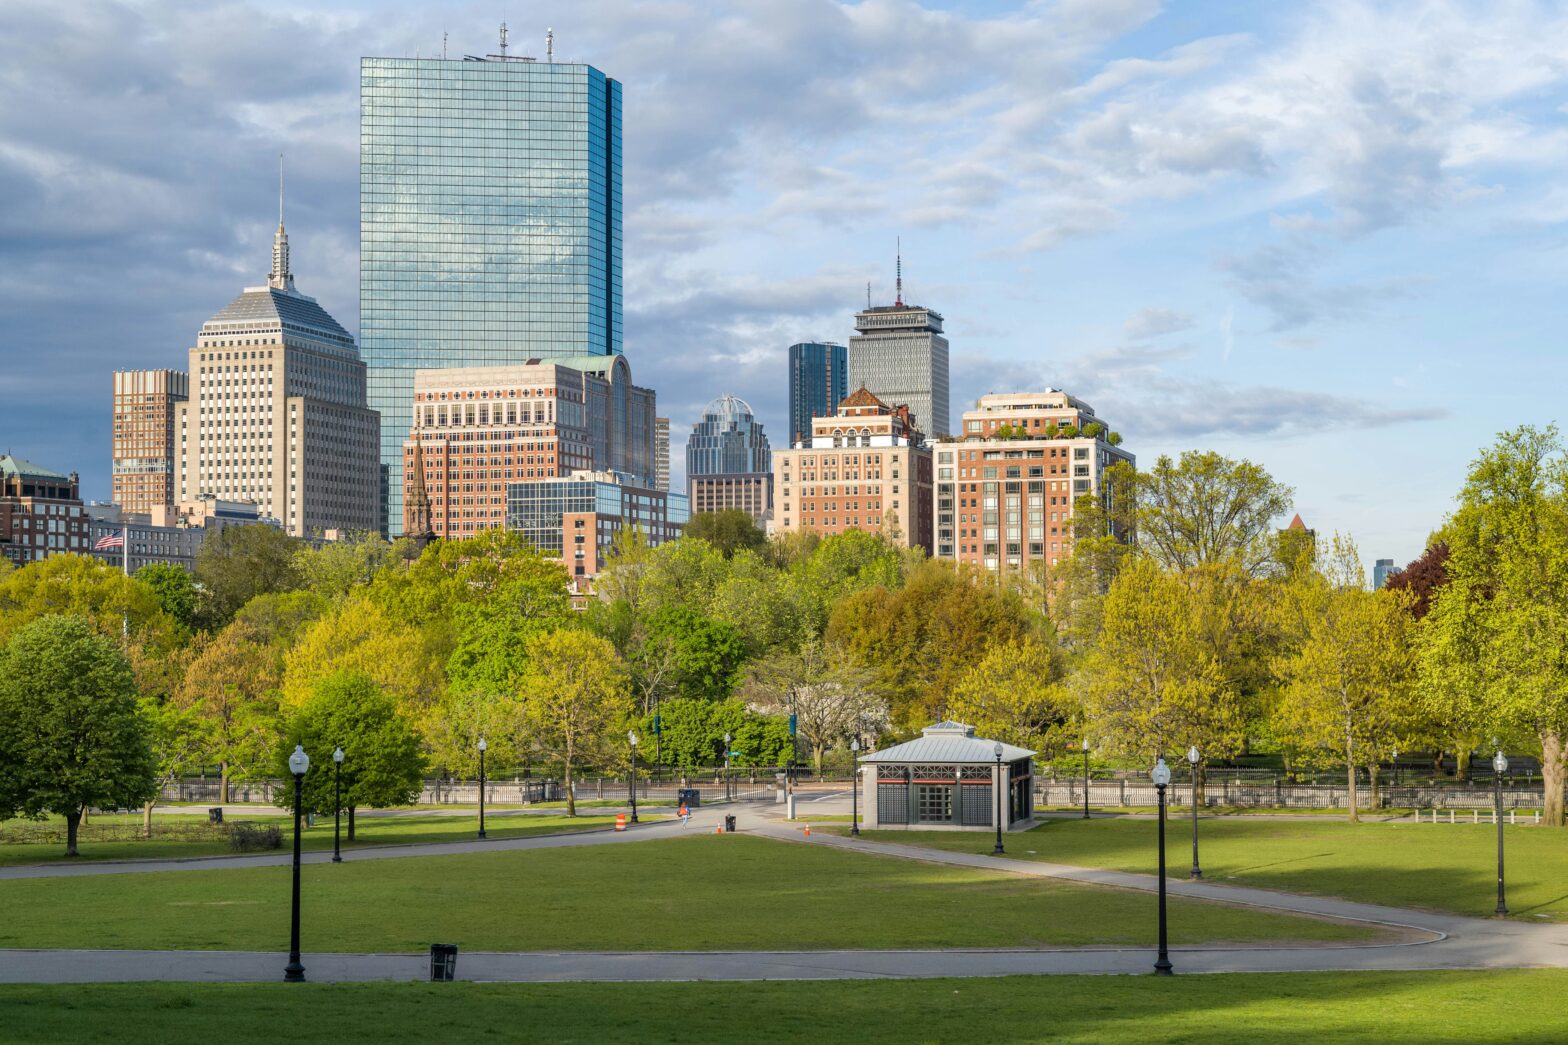 10 Things To Do In Boston For $25 Or Less